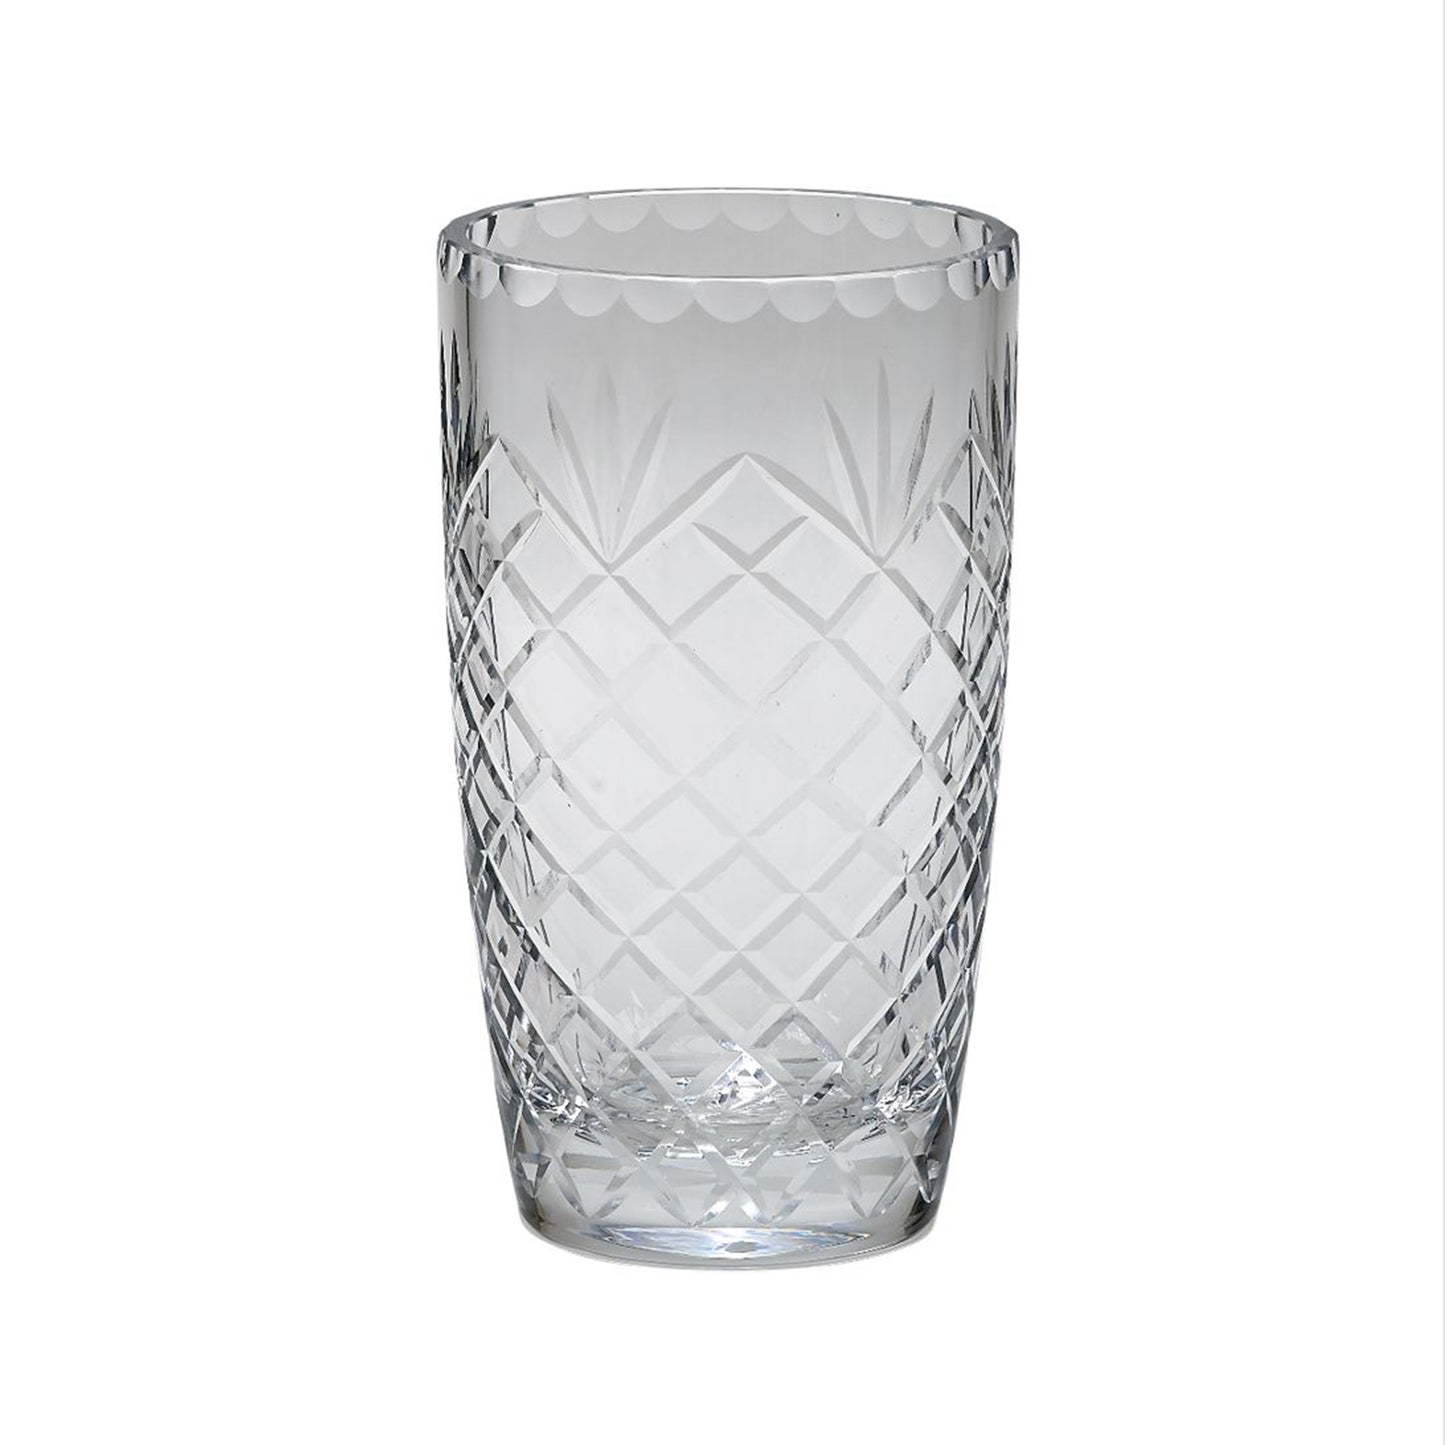 Optic Crystal Vase With Medallion Ll Pattern, 8.5"